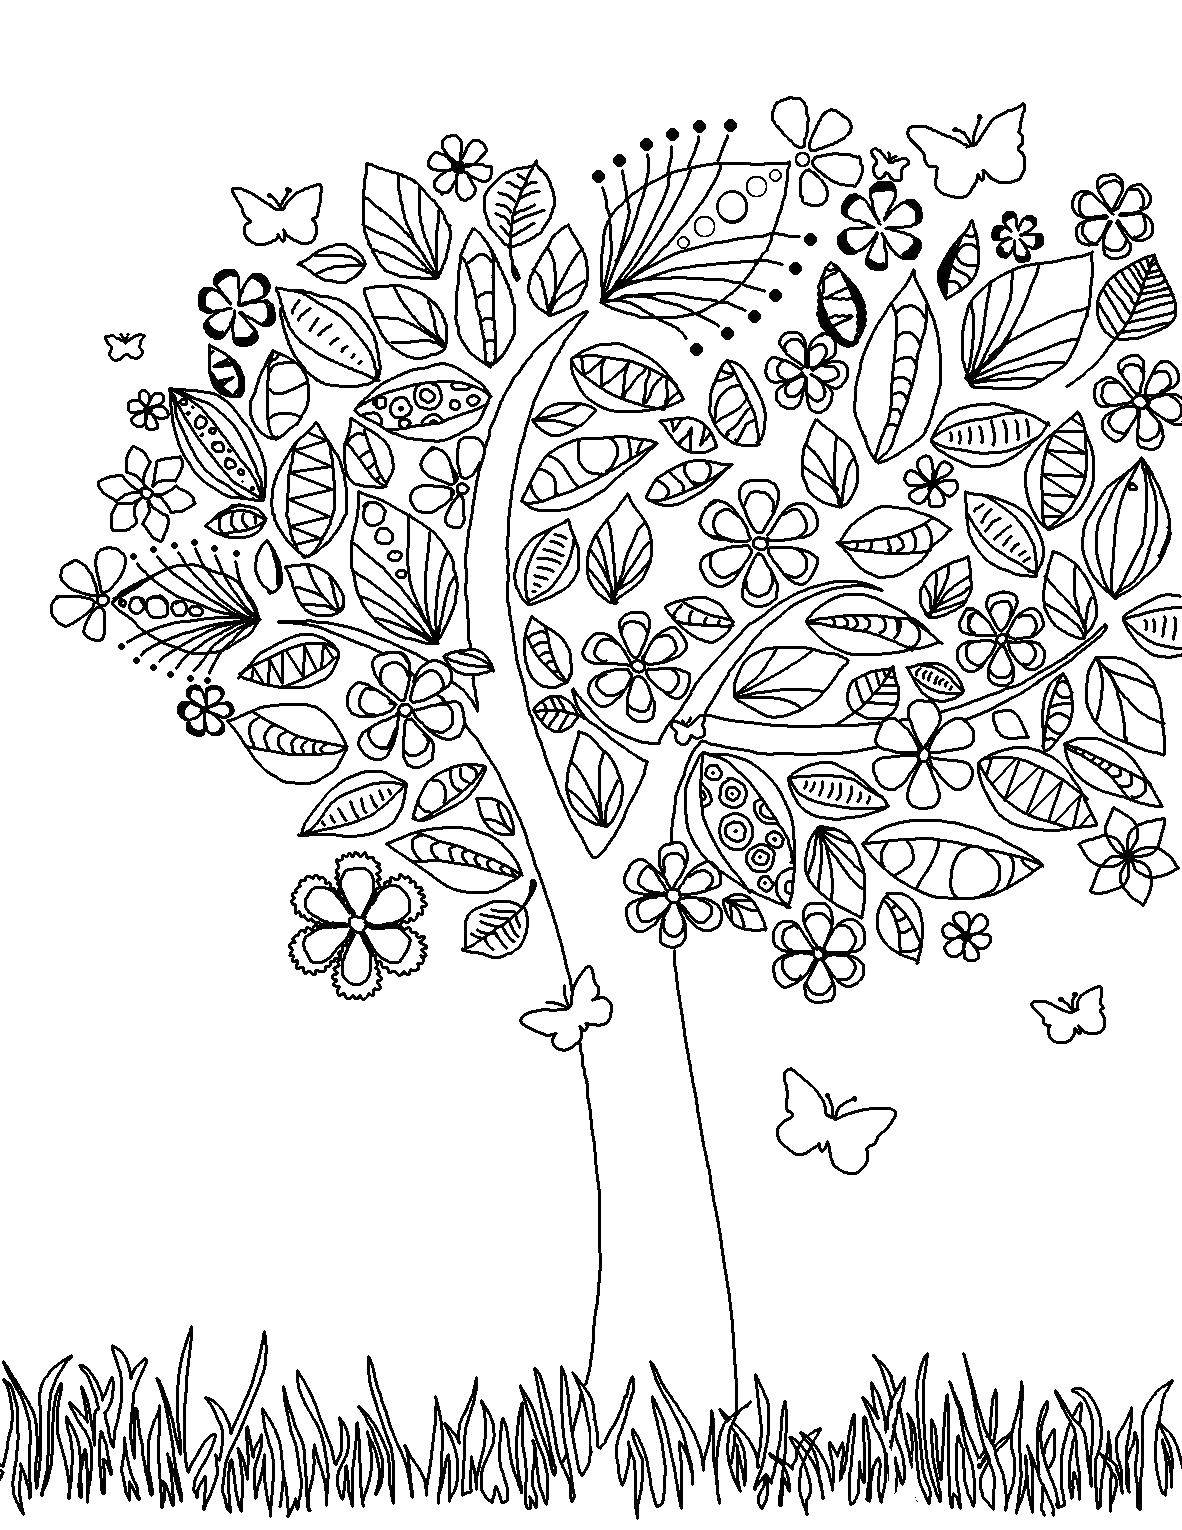 Coloring Beautiful tree and butterflies. Category tree. Tags:  Trees, butterflies.